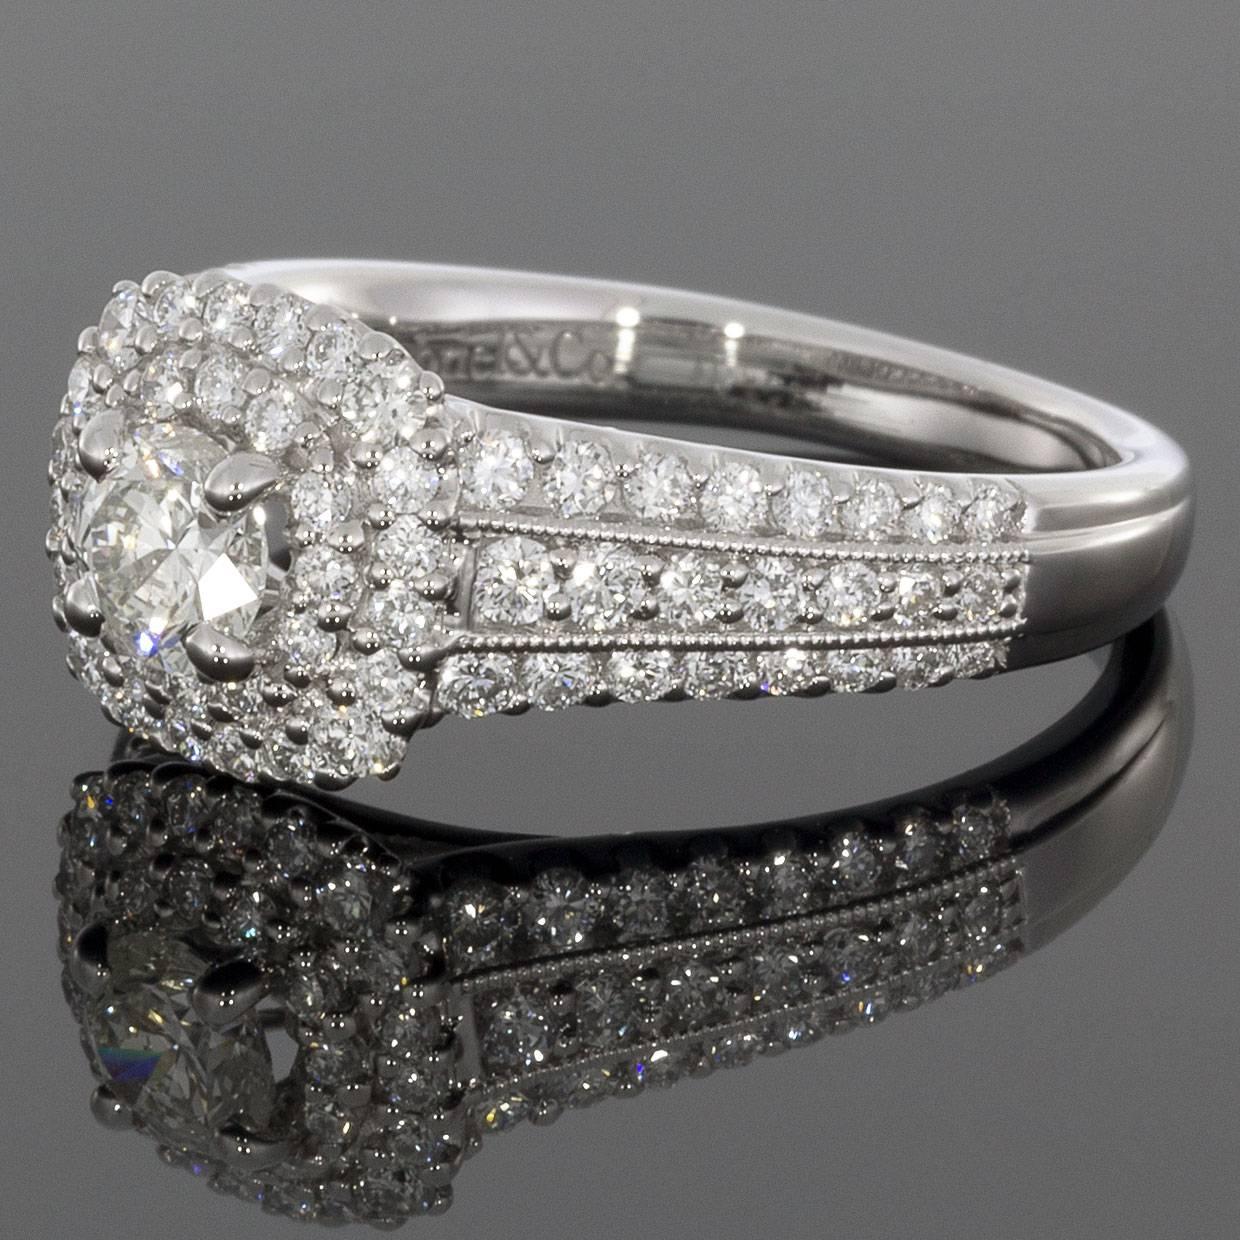 This classically styled band would make a wonderful engagement or anniversary ring. The ring is comprised of 14 karat white gold & features round brilliant cut diamonds that have a combined total weight of 1.45 carats. The center diamond is I/I1 in